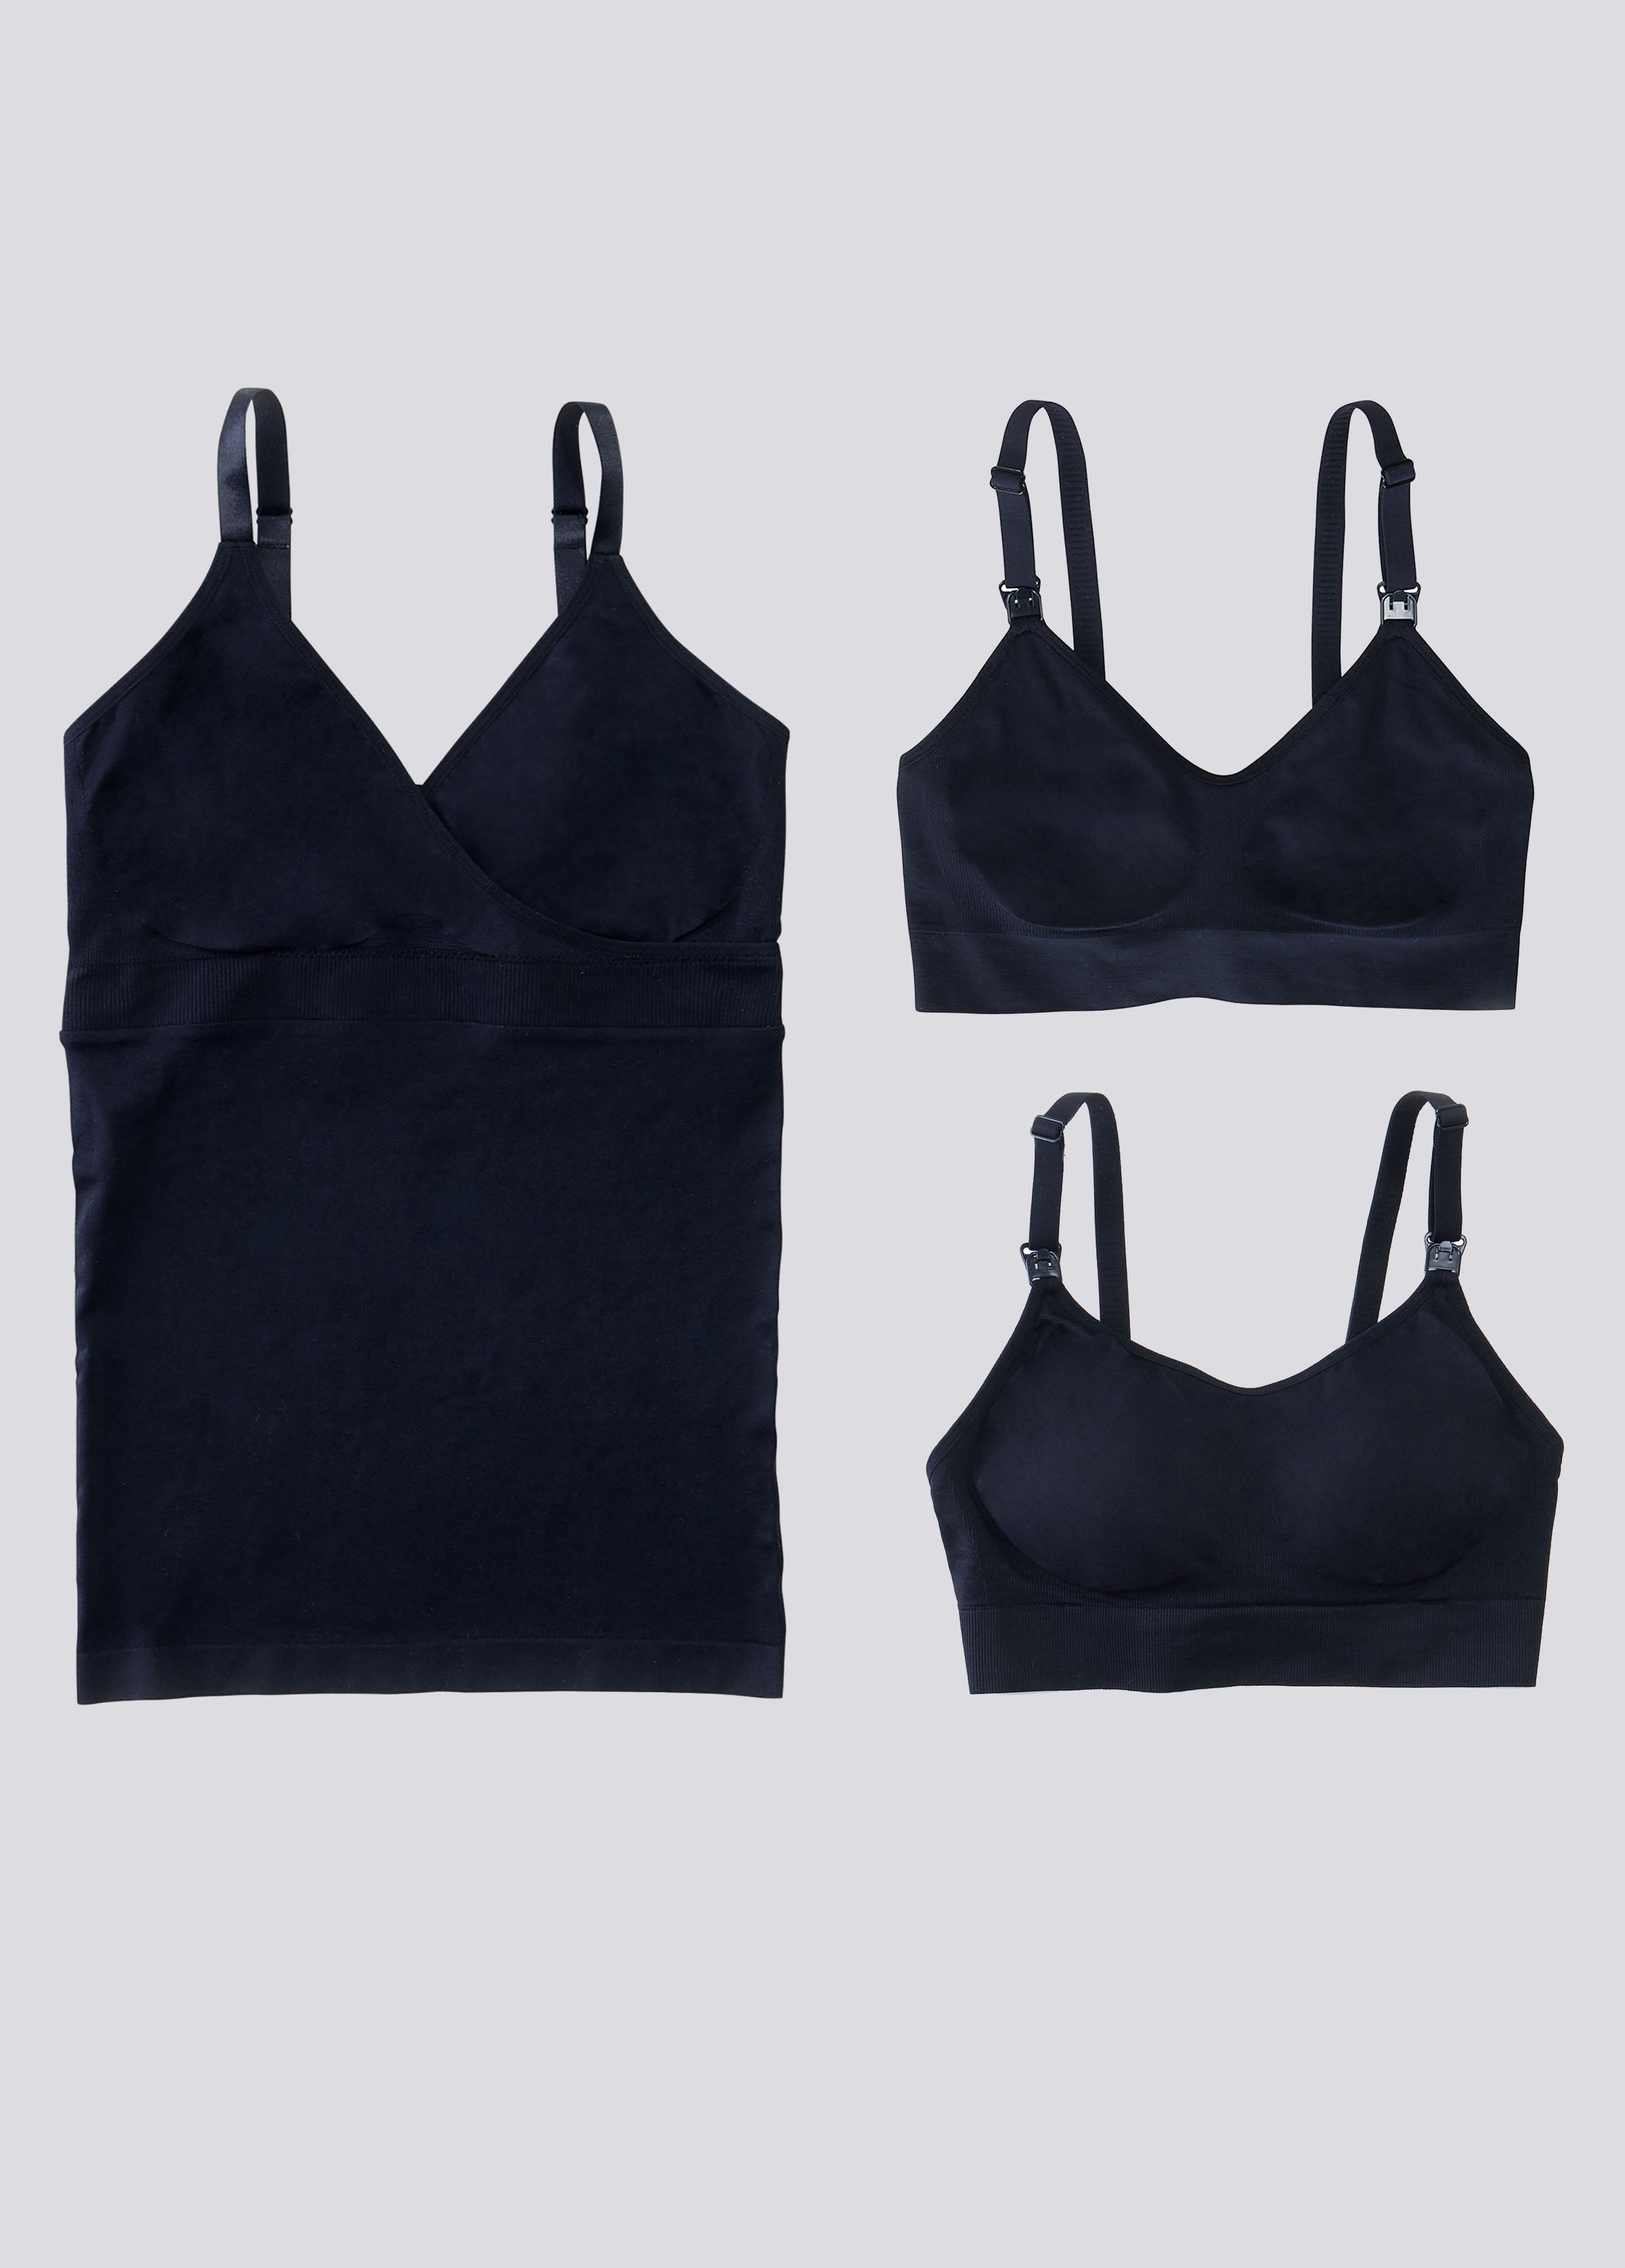 Featured Selection of Wholesale Nursing Bra for Trendy Bumps 